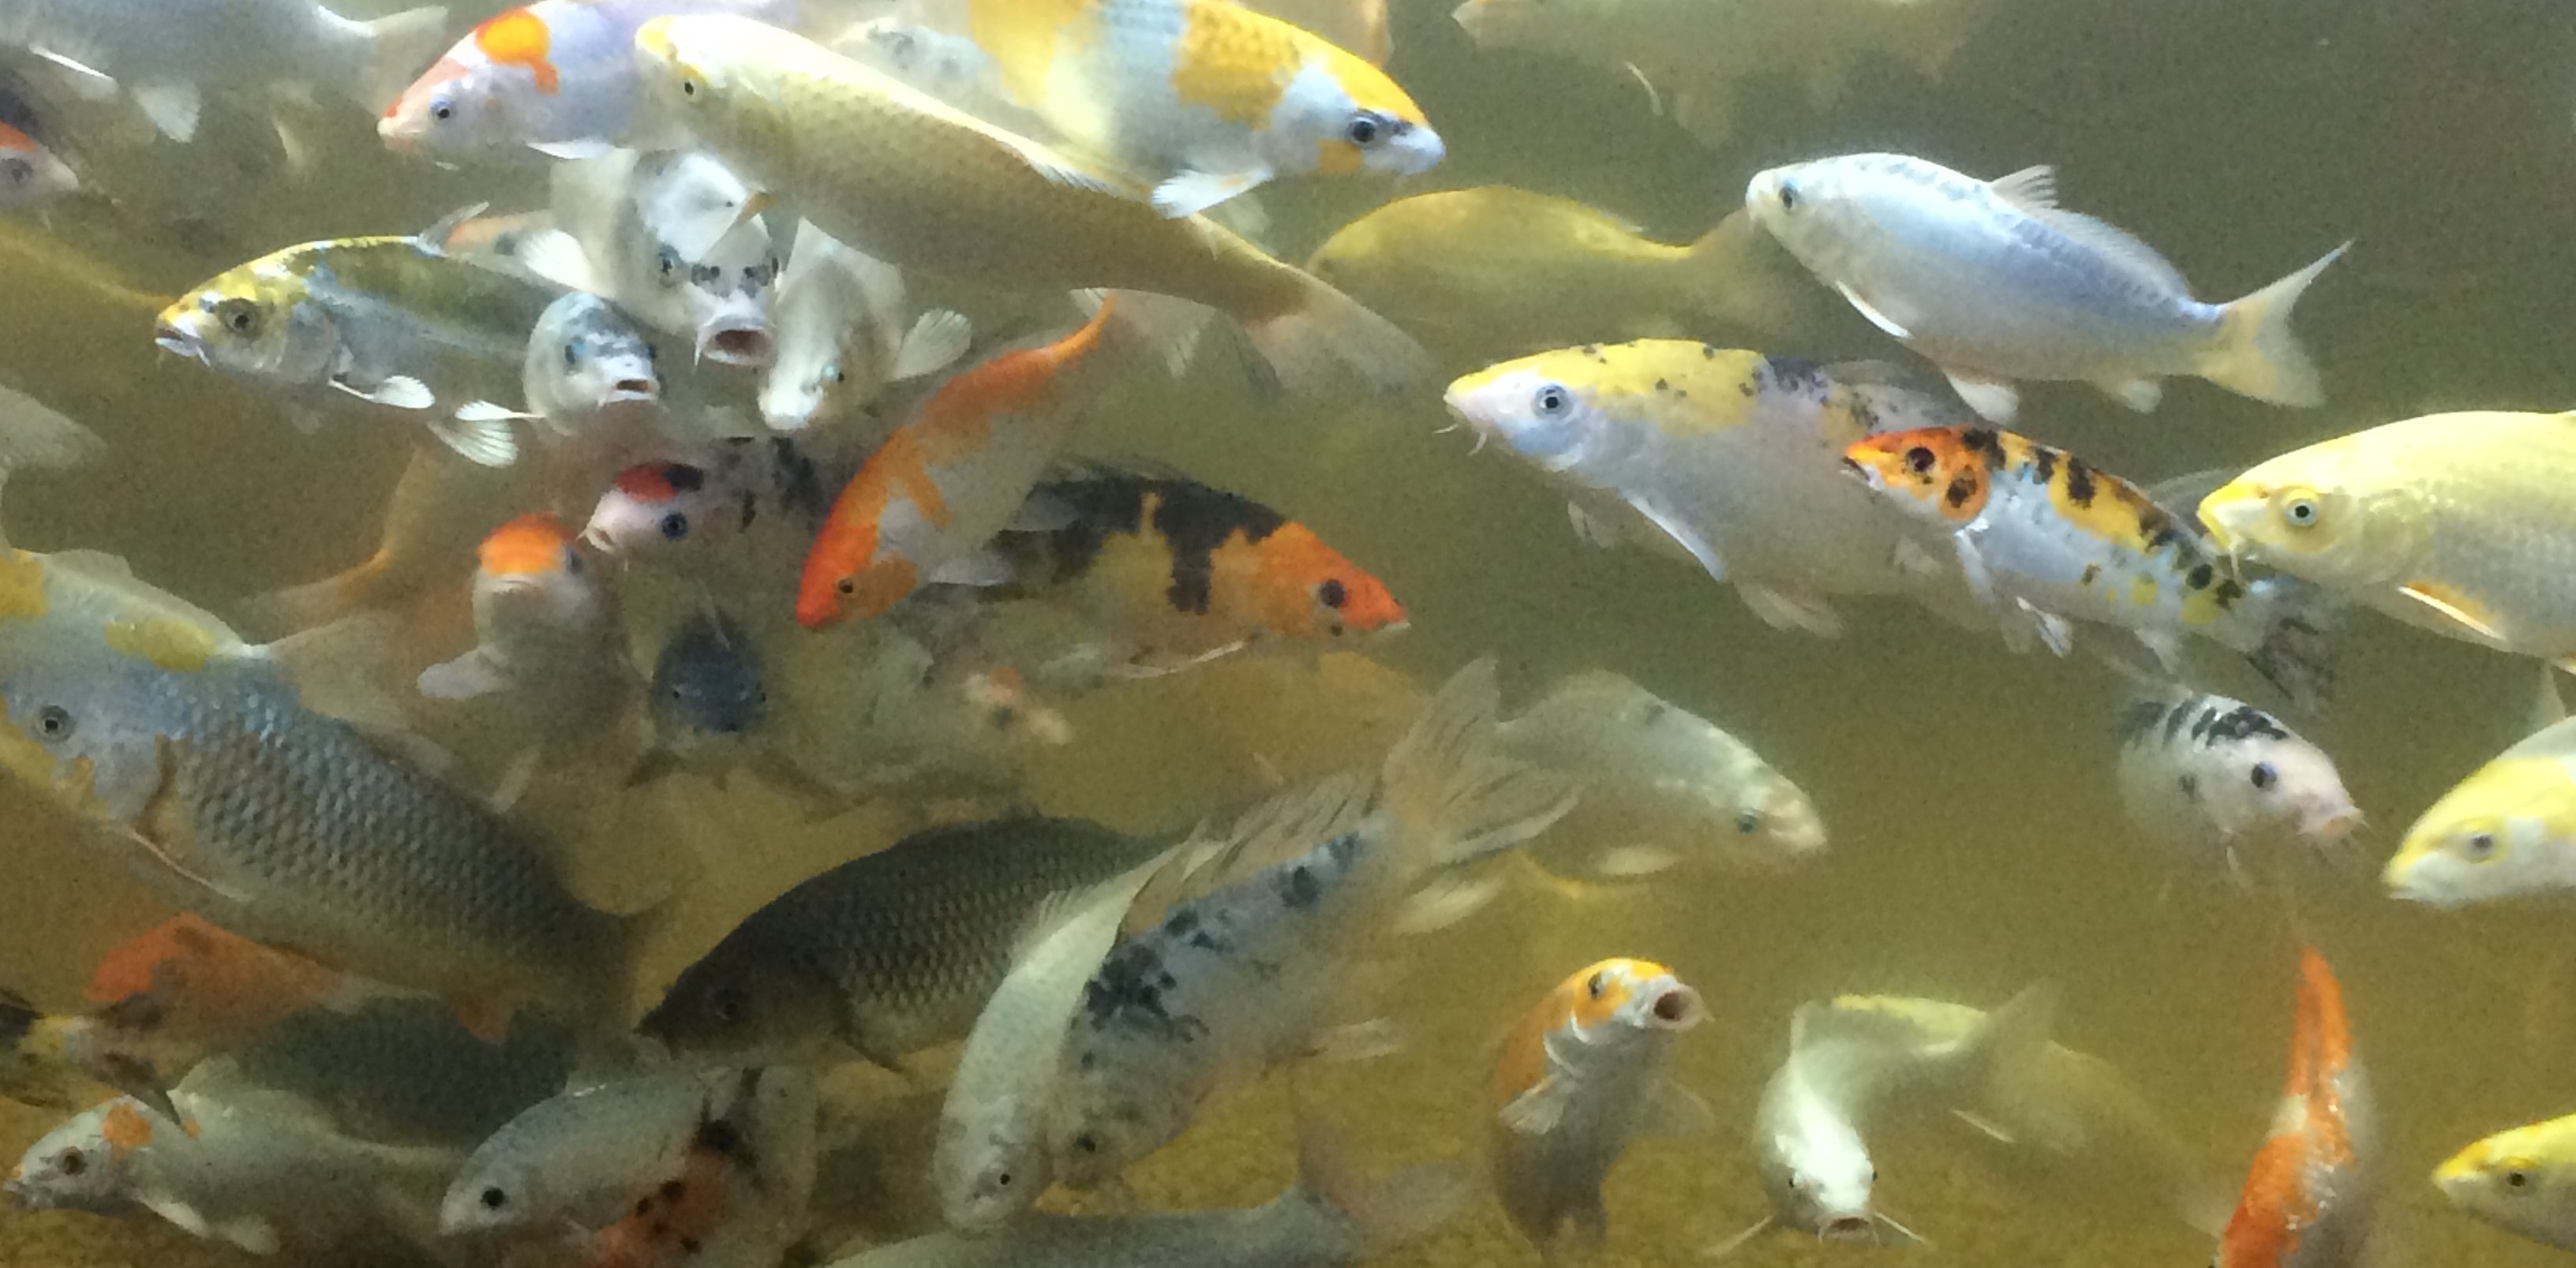 Here are the hungry koi fish.